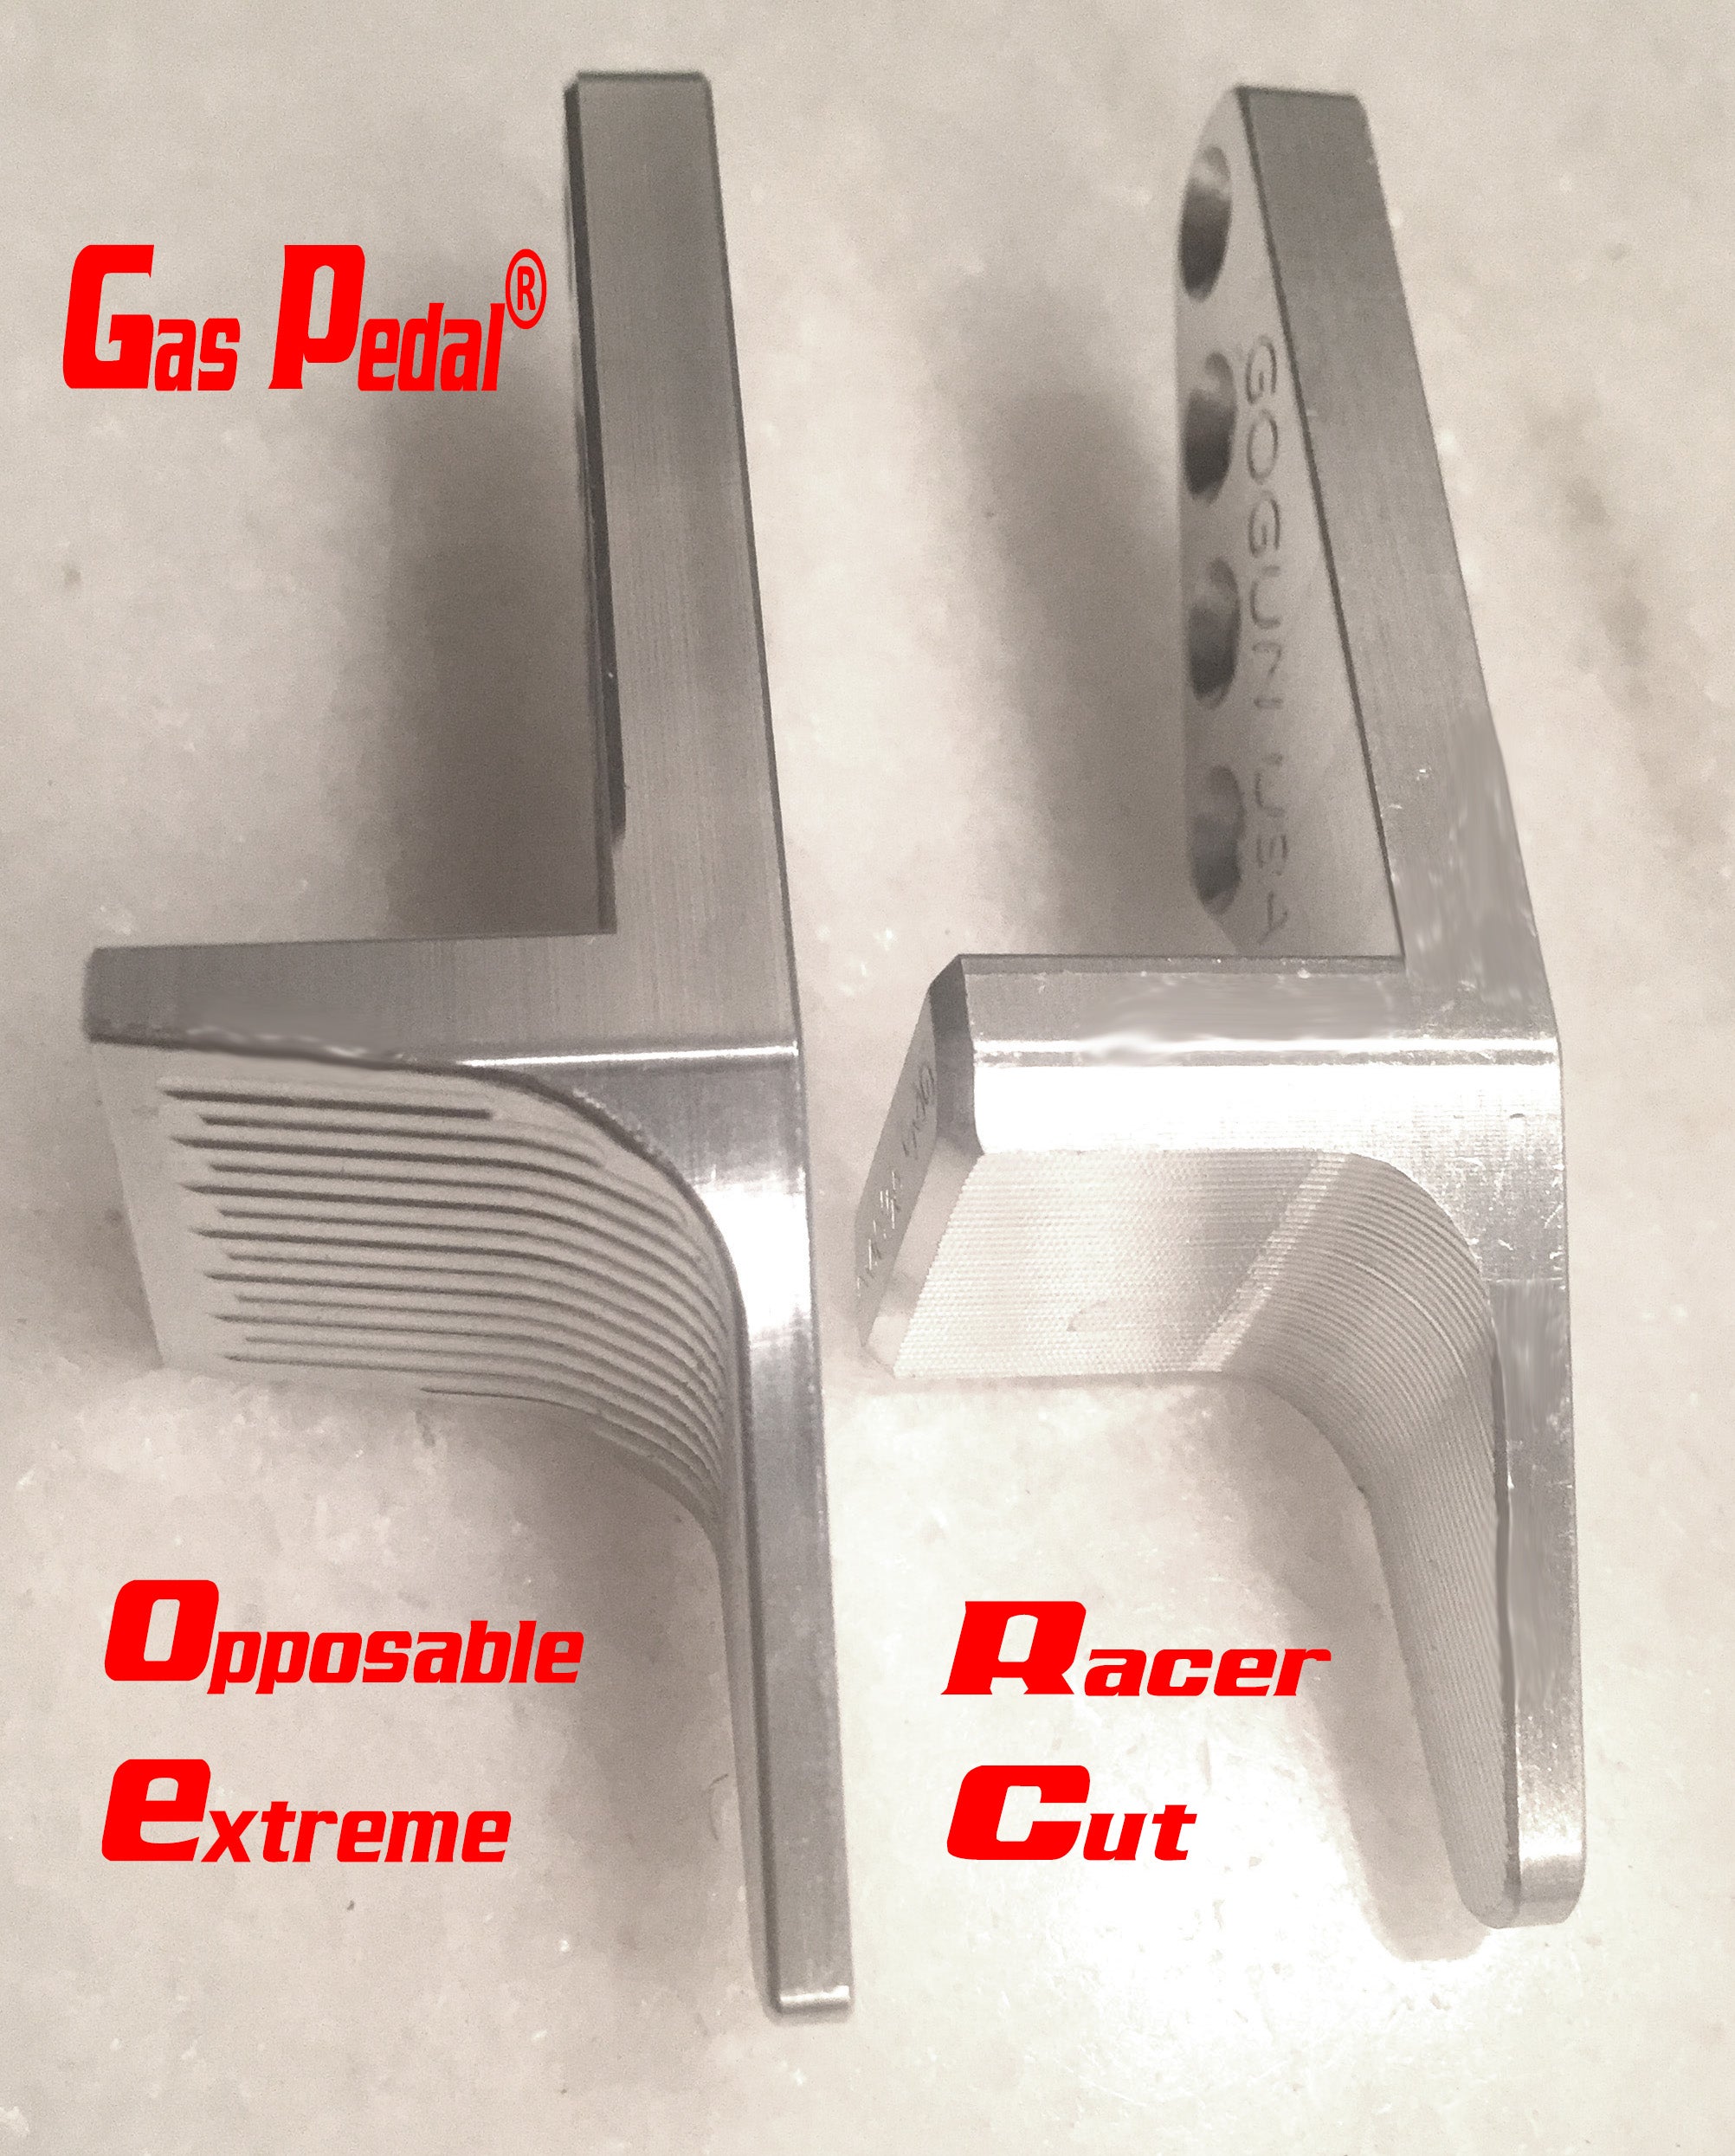 Gas Pedal Opposable Extreme compared to Gas Pedal Racer Cut